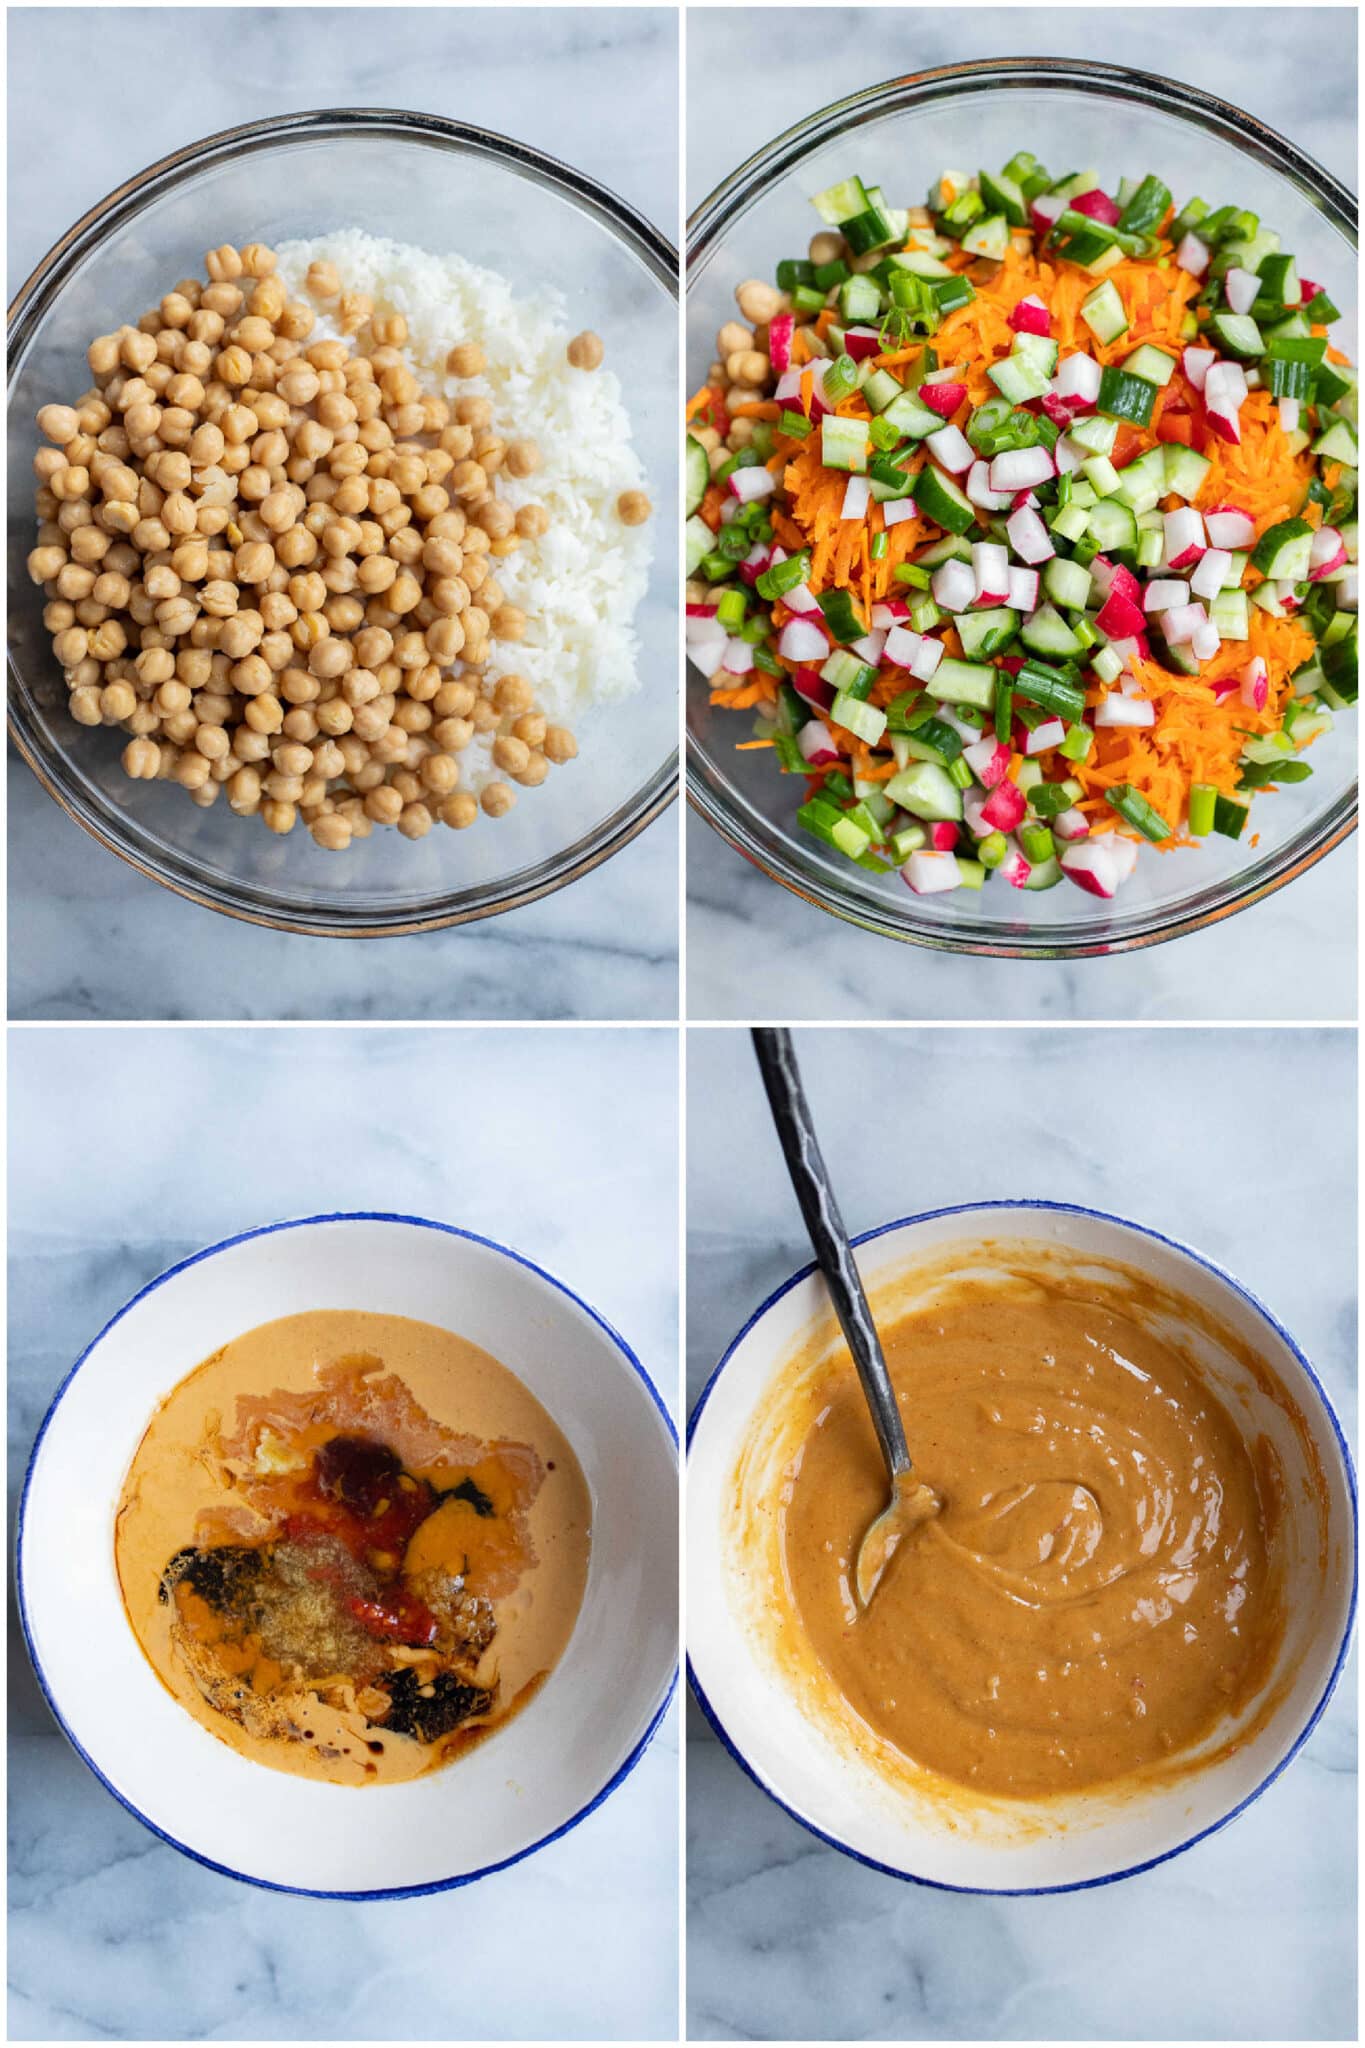 showing how to make a rice and chickpea salad with lots of vegetables and a homemade peanut sauce dressing